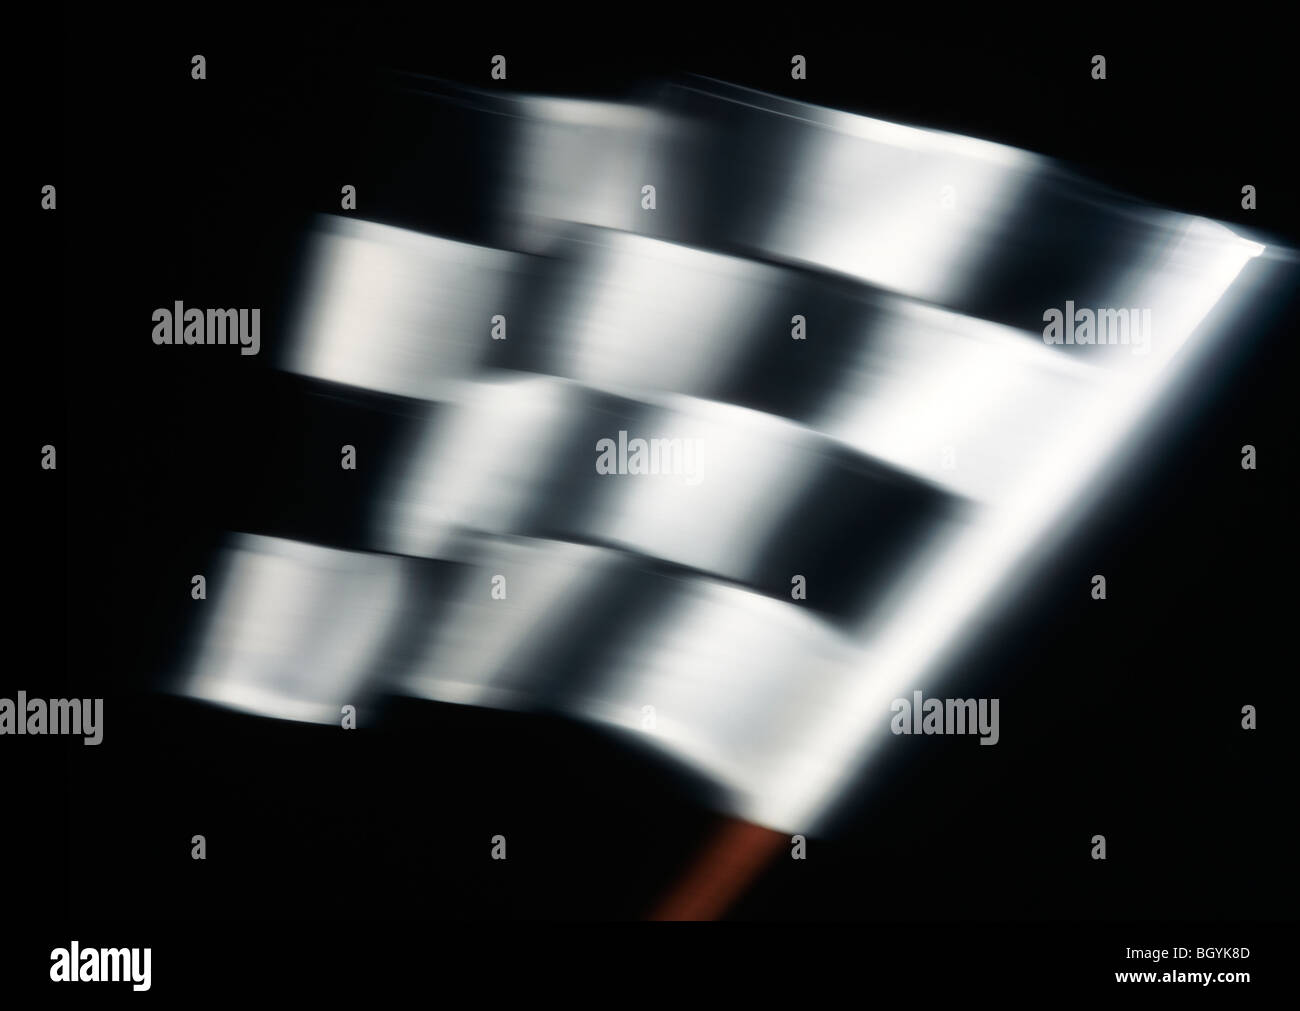 Chequered flag with Movement on a Black Background Stock Photo